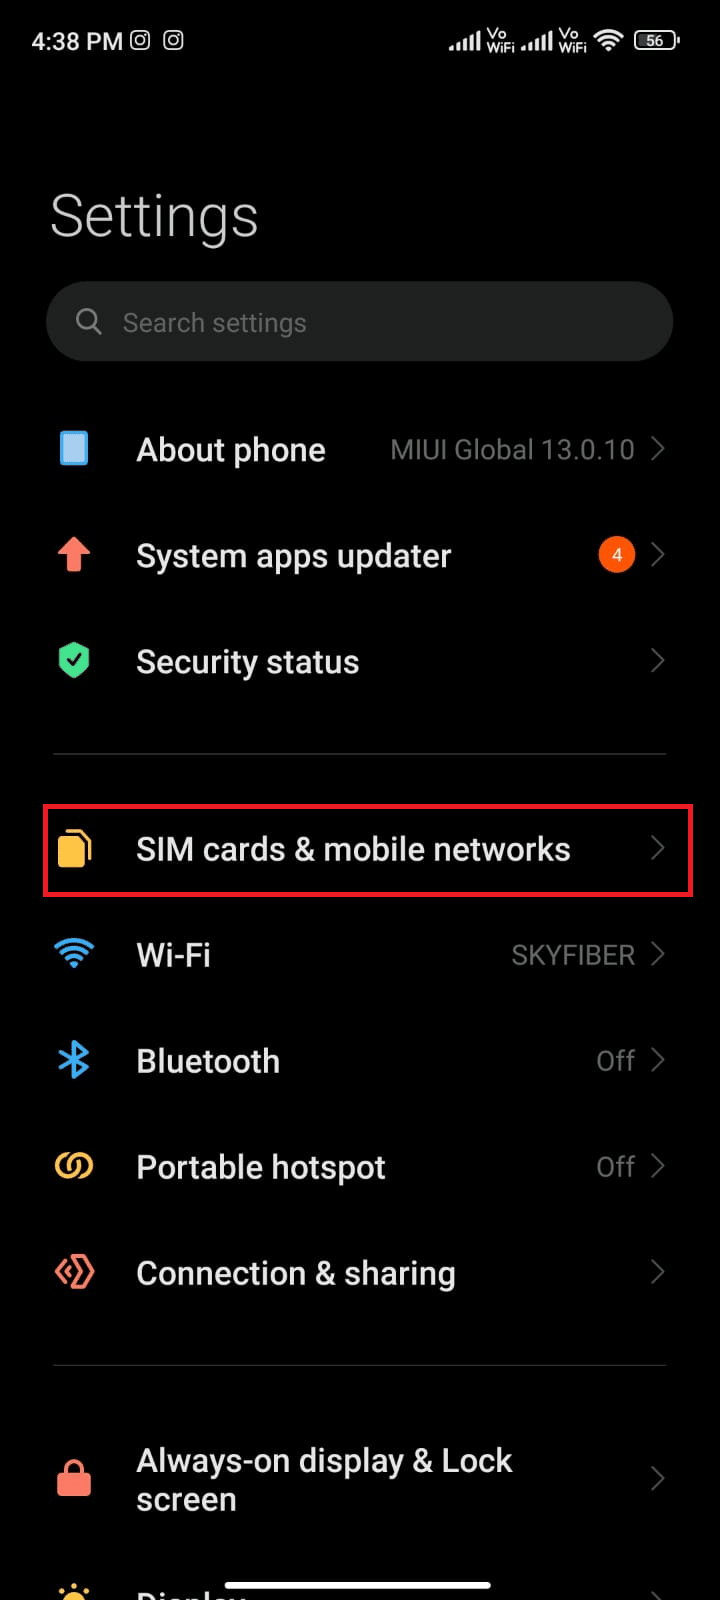 tap the SIM cards and mobile networks option. Fix Google Play Store Error Checking for Updates